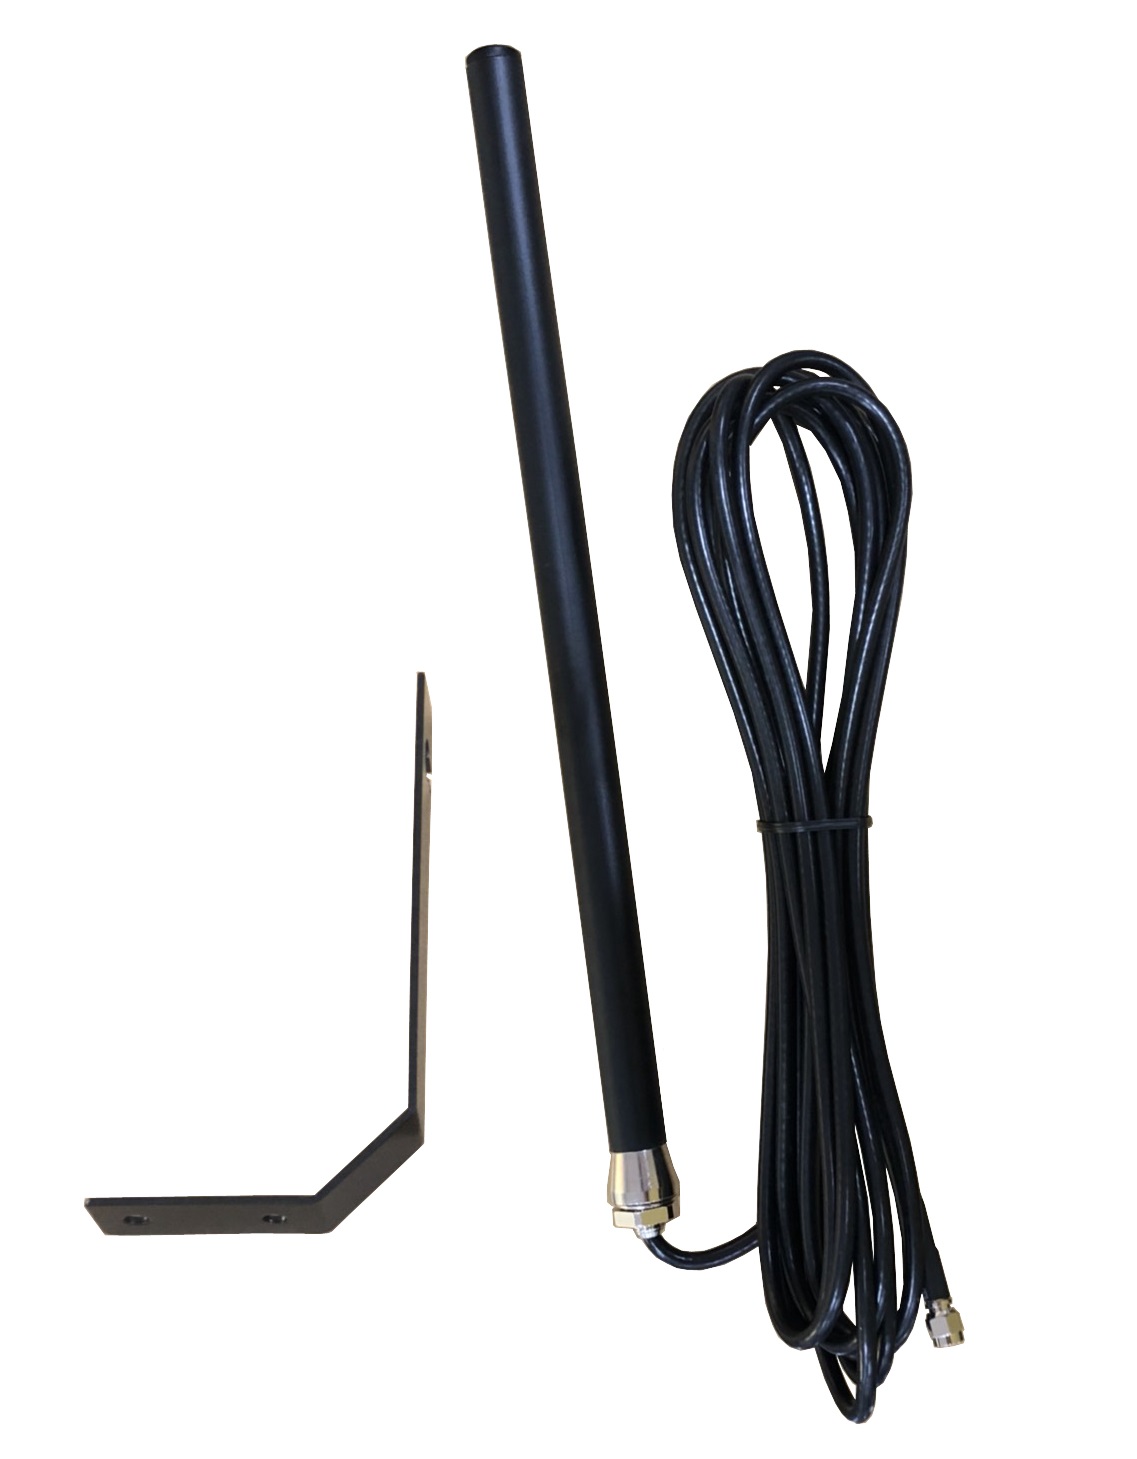 Automobile OMNI Antenna for Car Electronic Accessories made by Chinmore Industry Co., LTD.　竣茂工業有限公司 - MatchSupplier.com